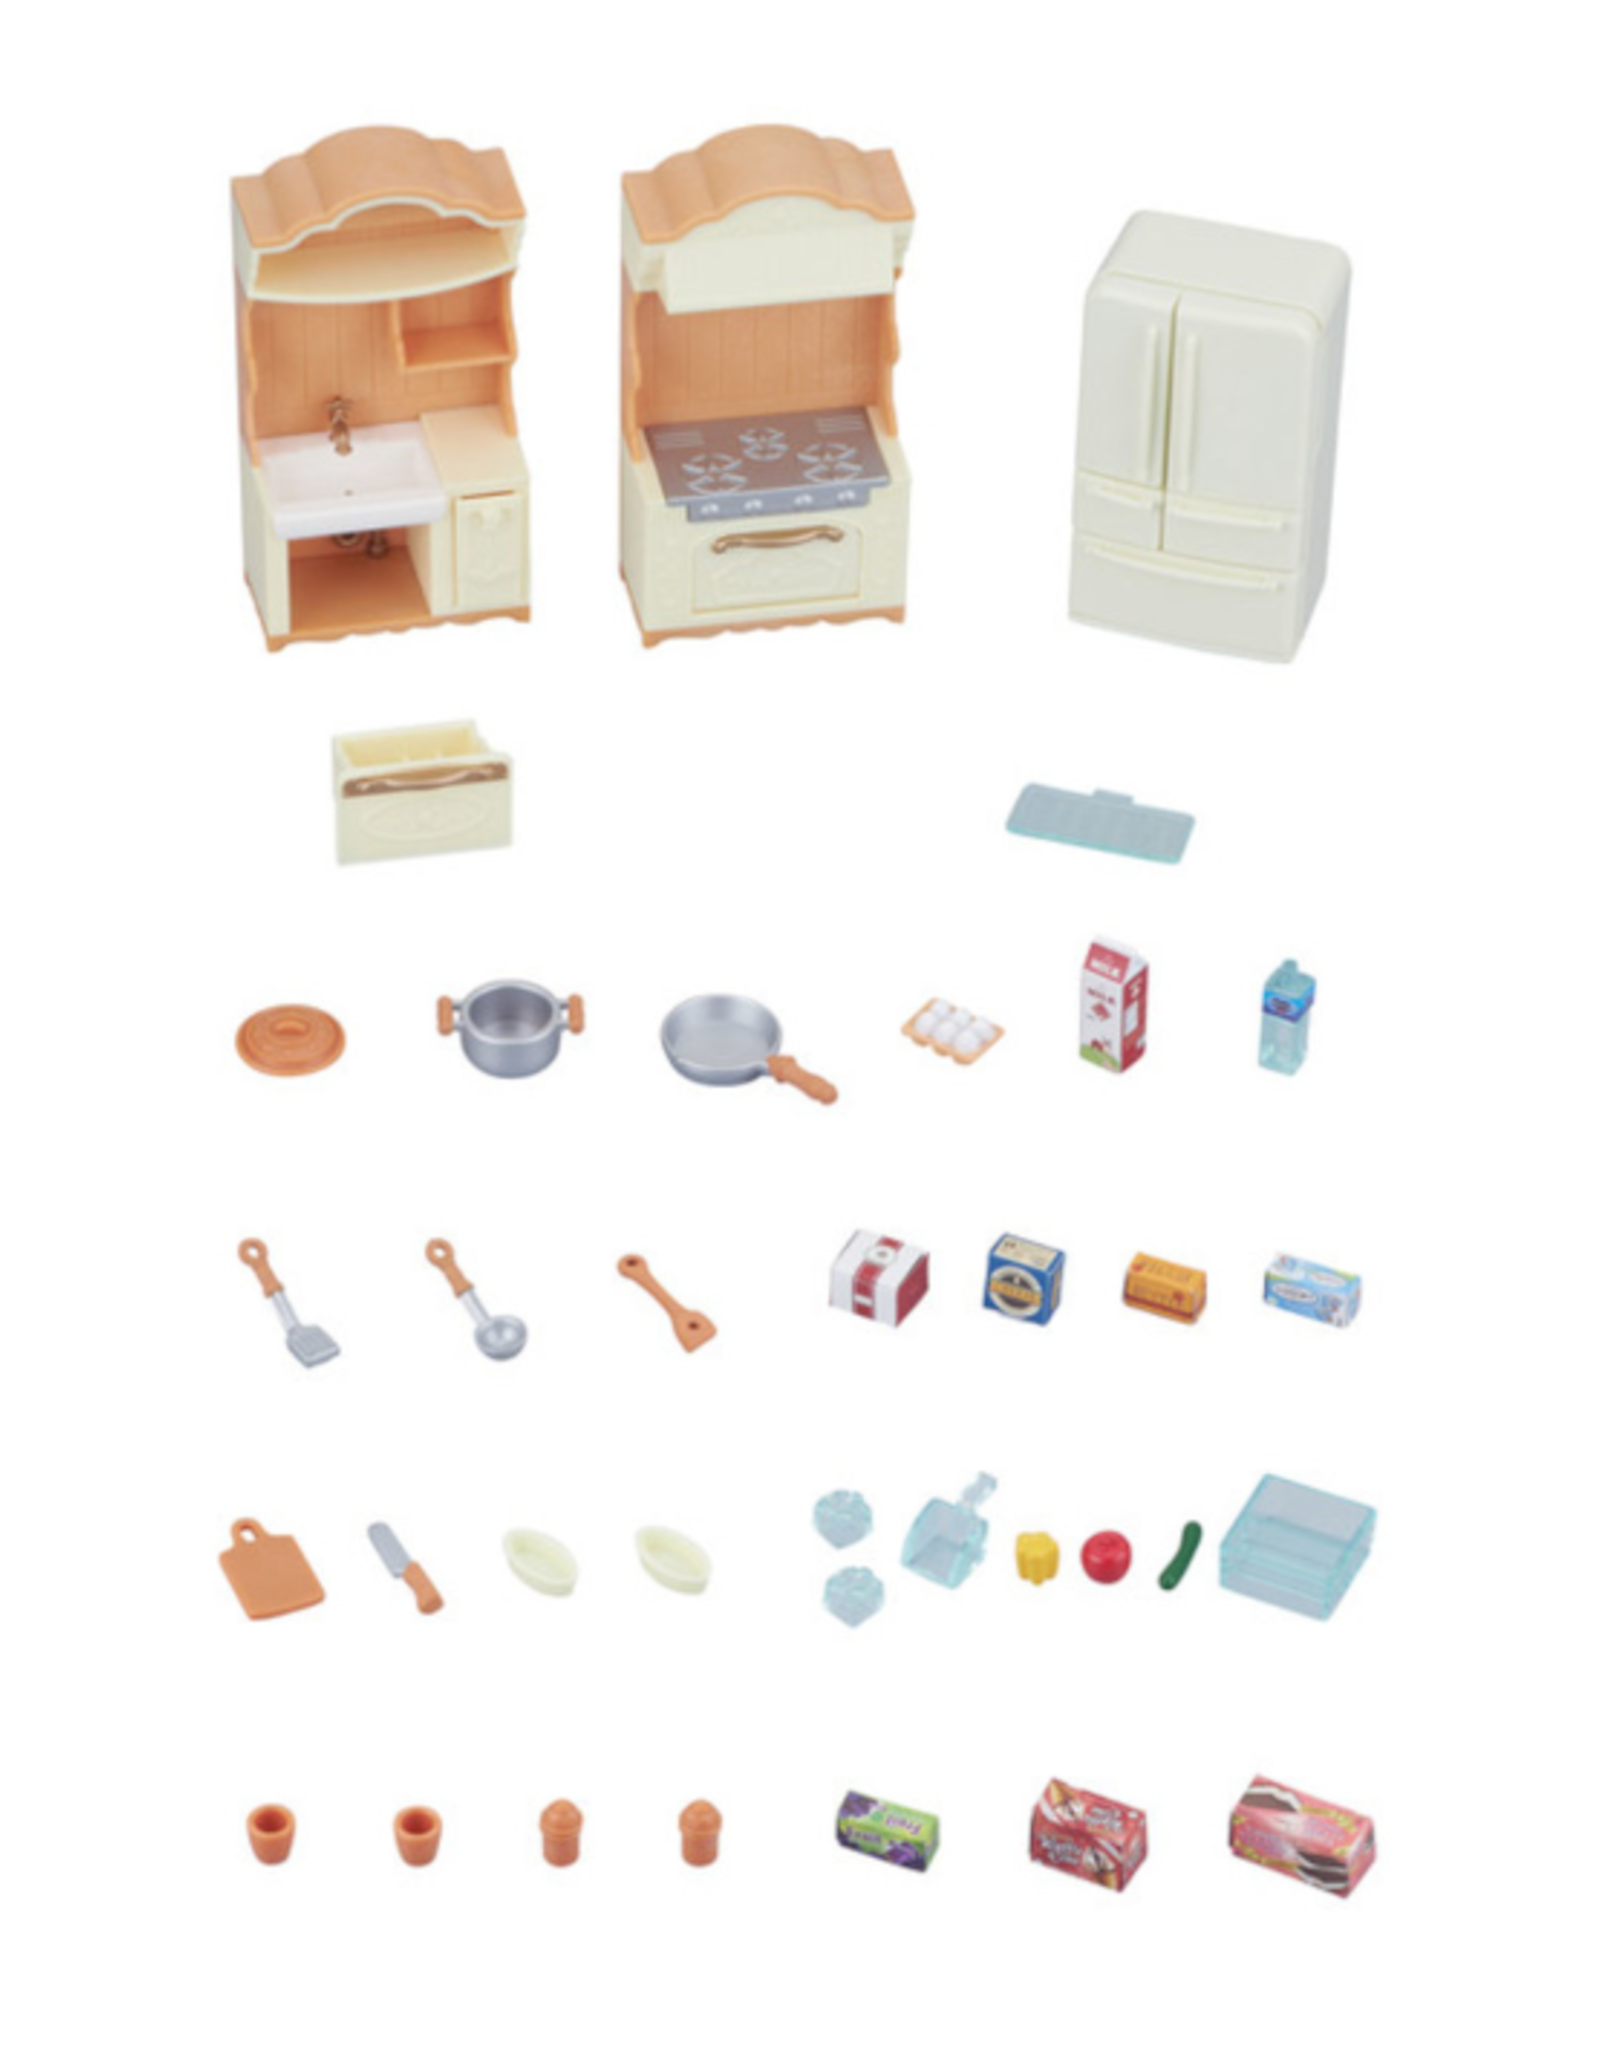 Calico Critters Calico Critters - Kitchen Play Set